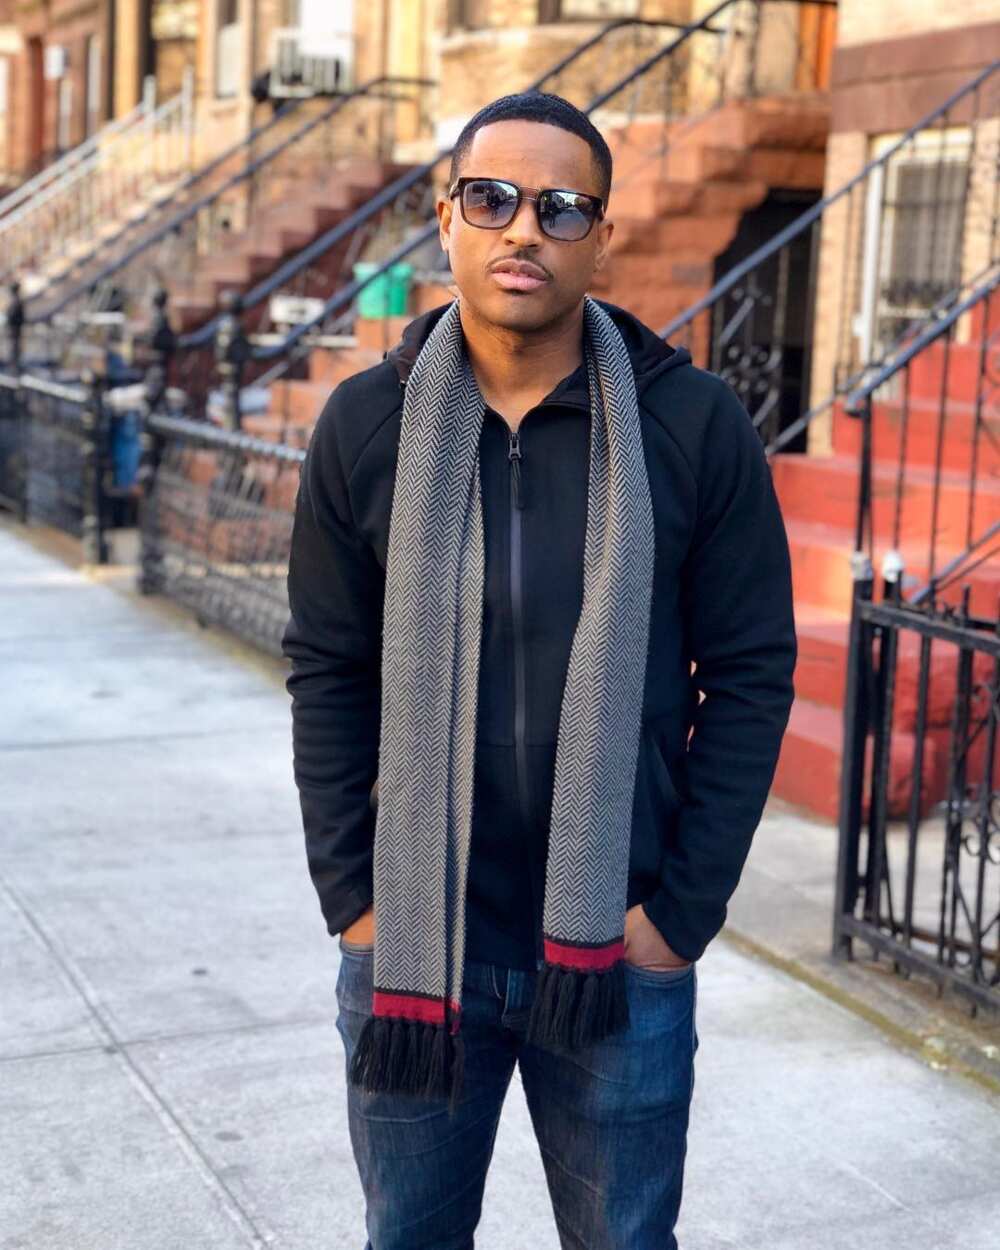 How tall is Larenz Tate